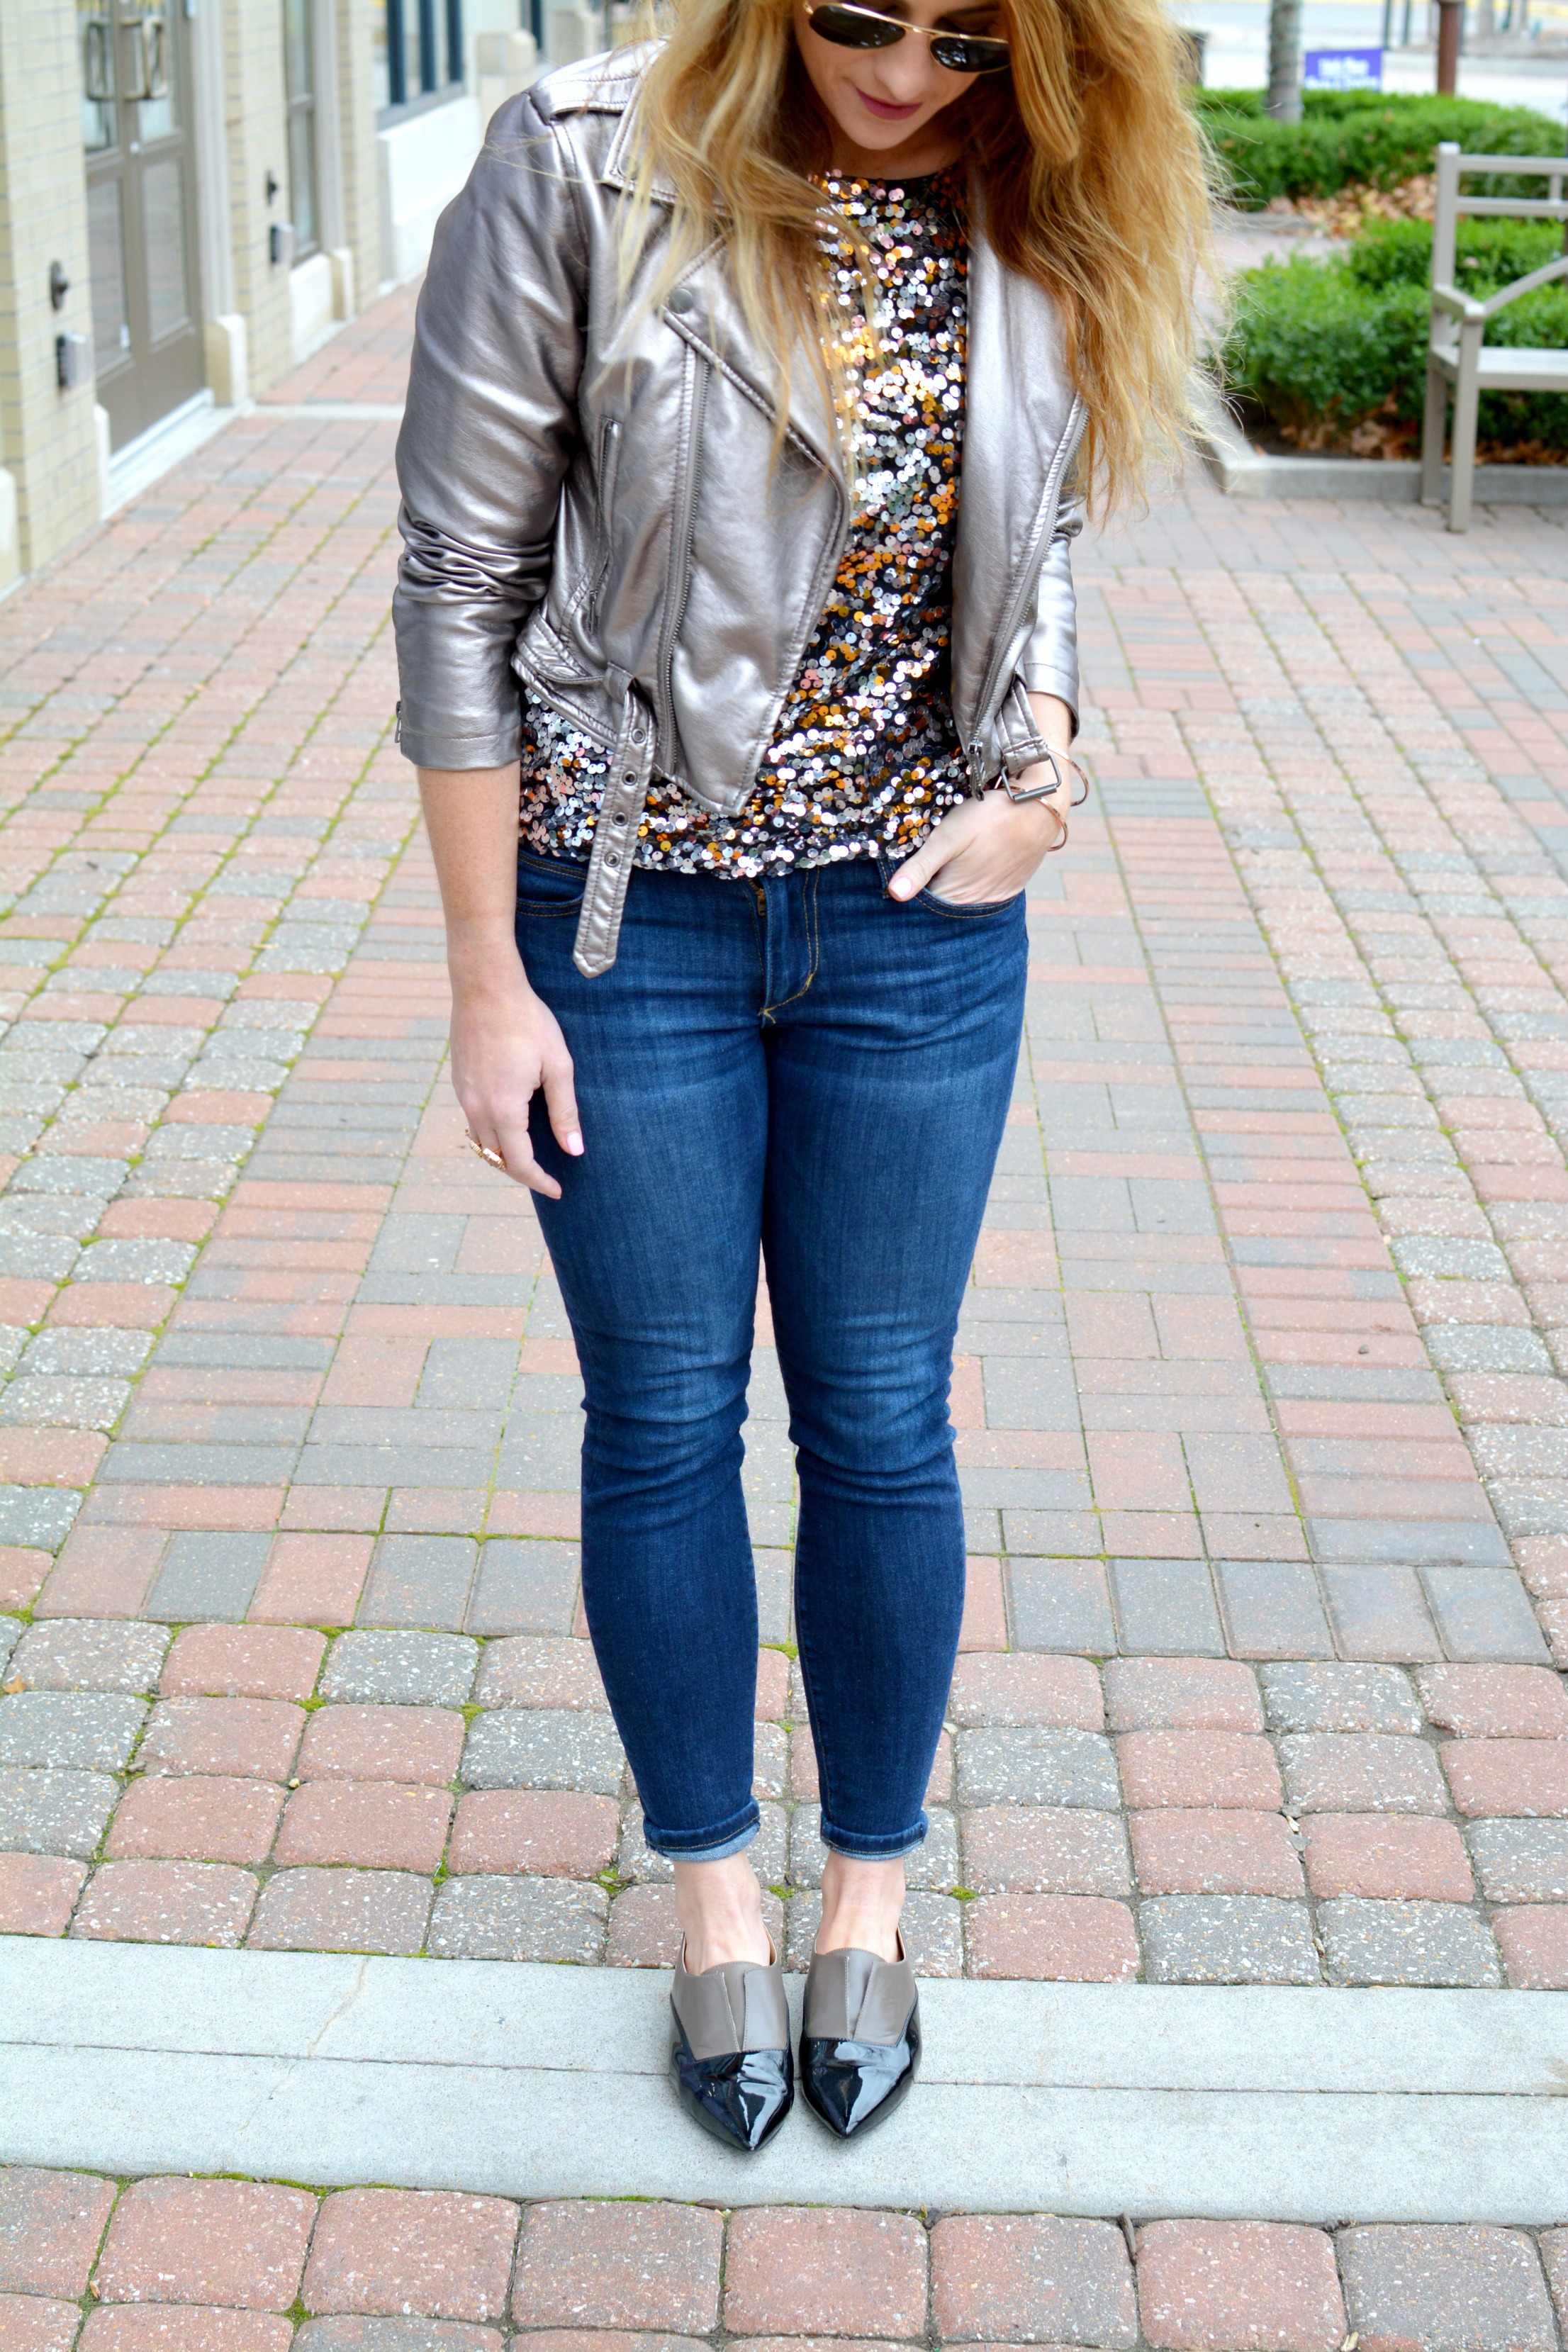 Shiny Holiday: Metallic Leather Jacket + Sequined Top. | LSR